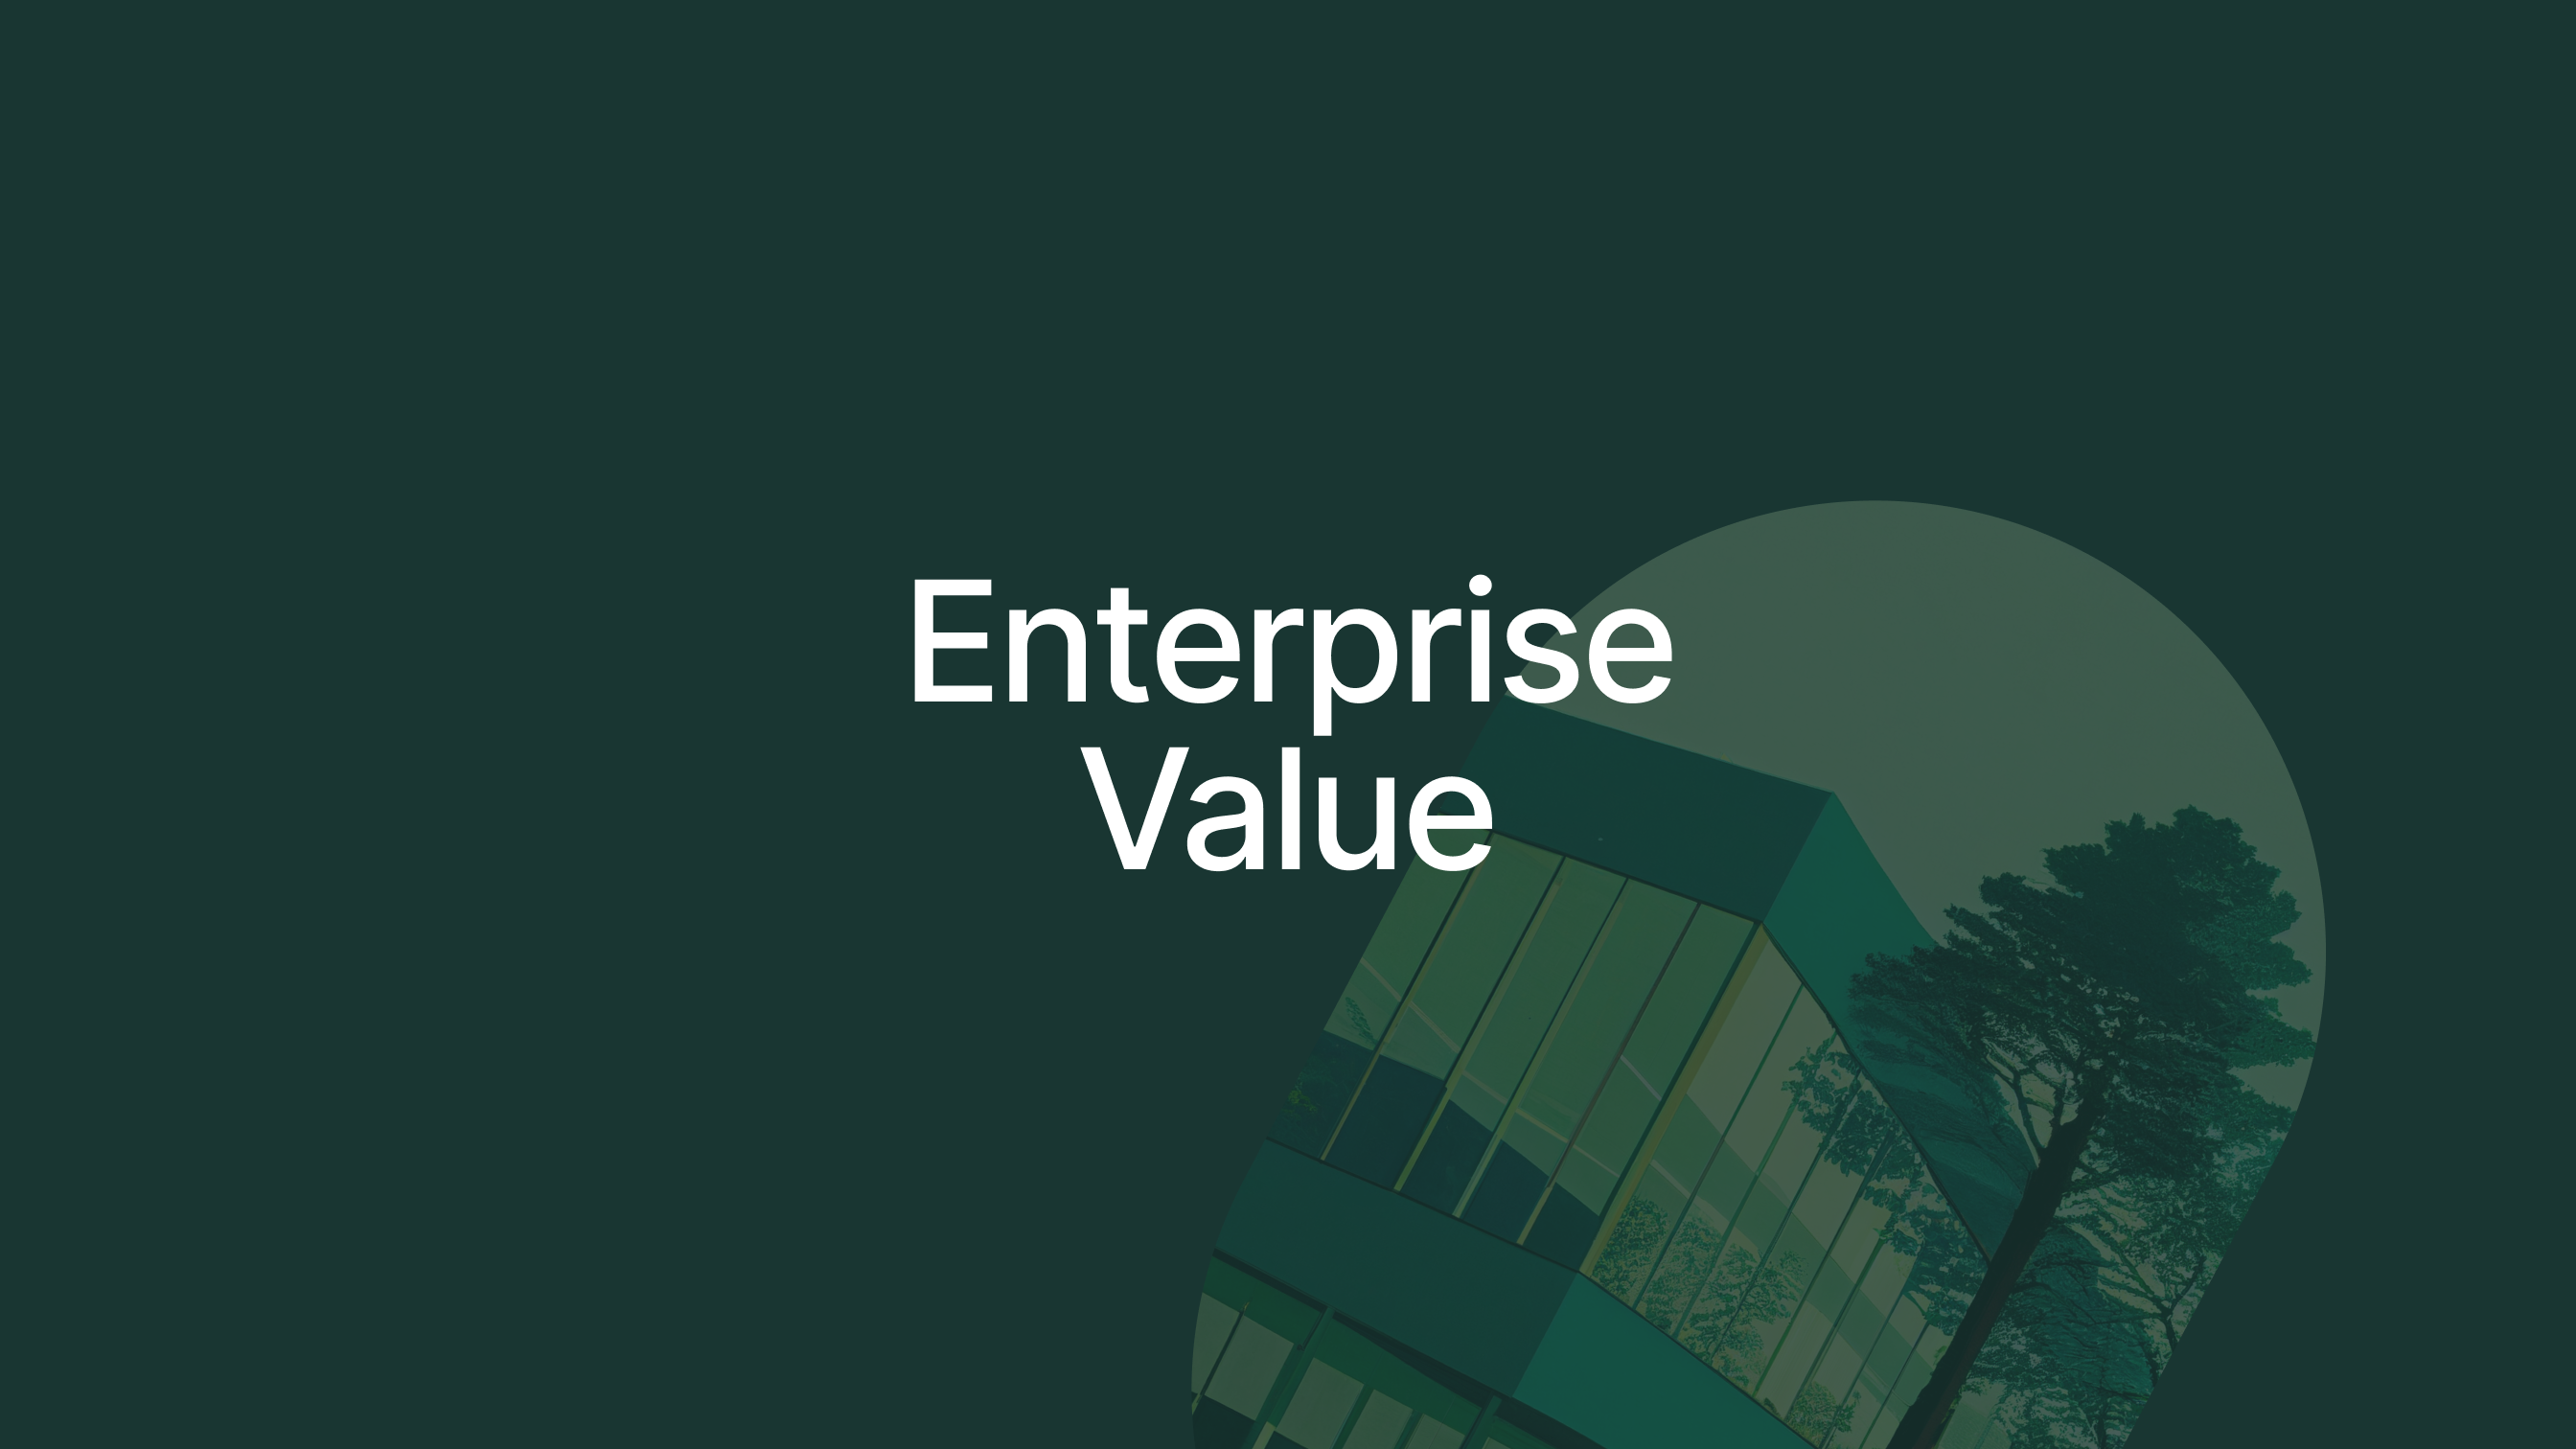 Enterprise Value - How to calculate it!